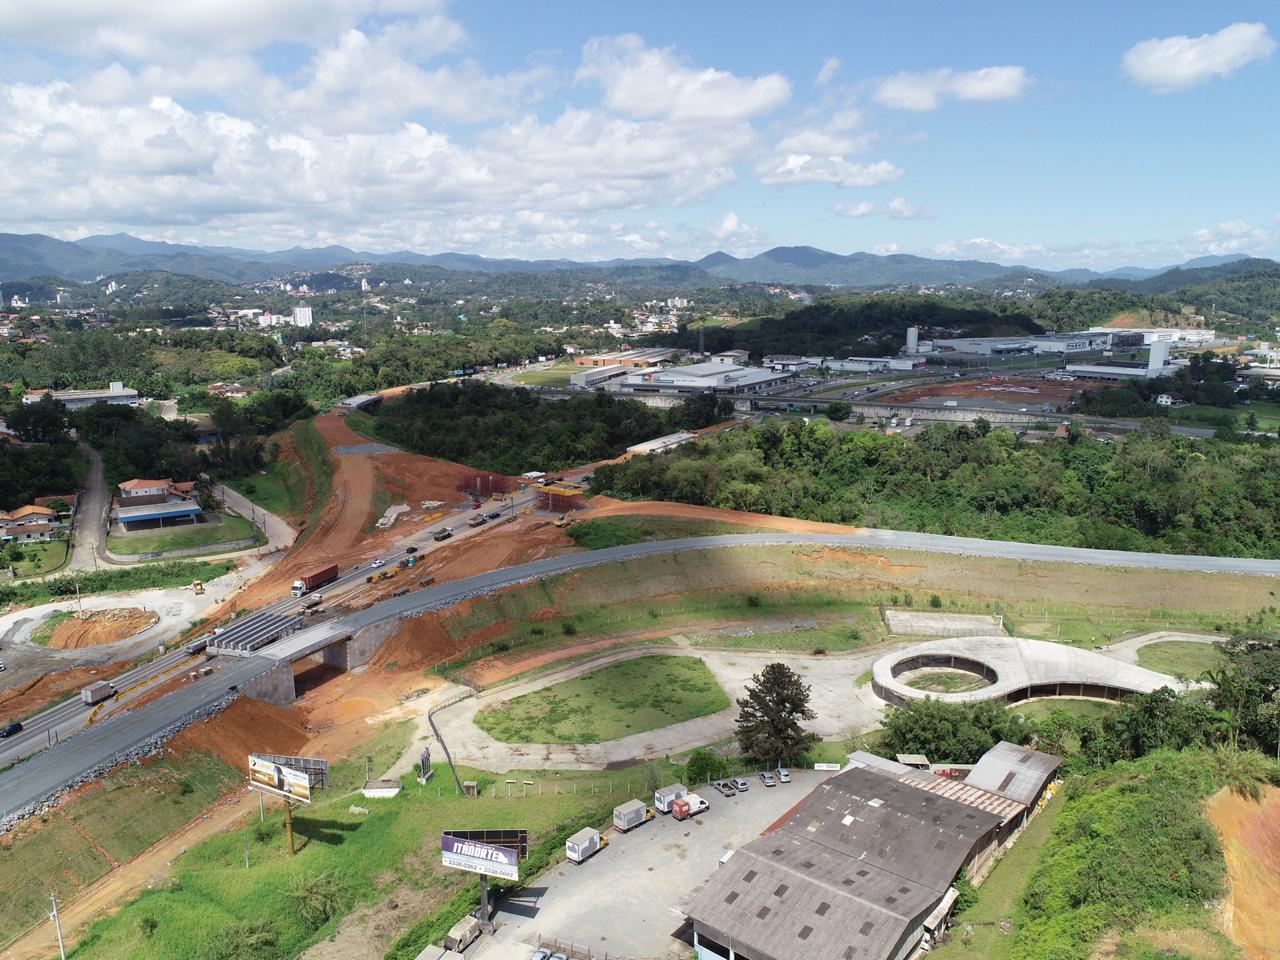 In August 2020, DNIT released the new Maphisa viaduct on BR-470 in Blumenau - Dnit/Disclosure/ND.